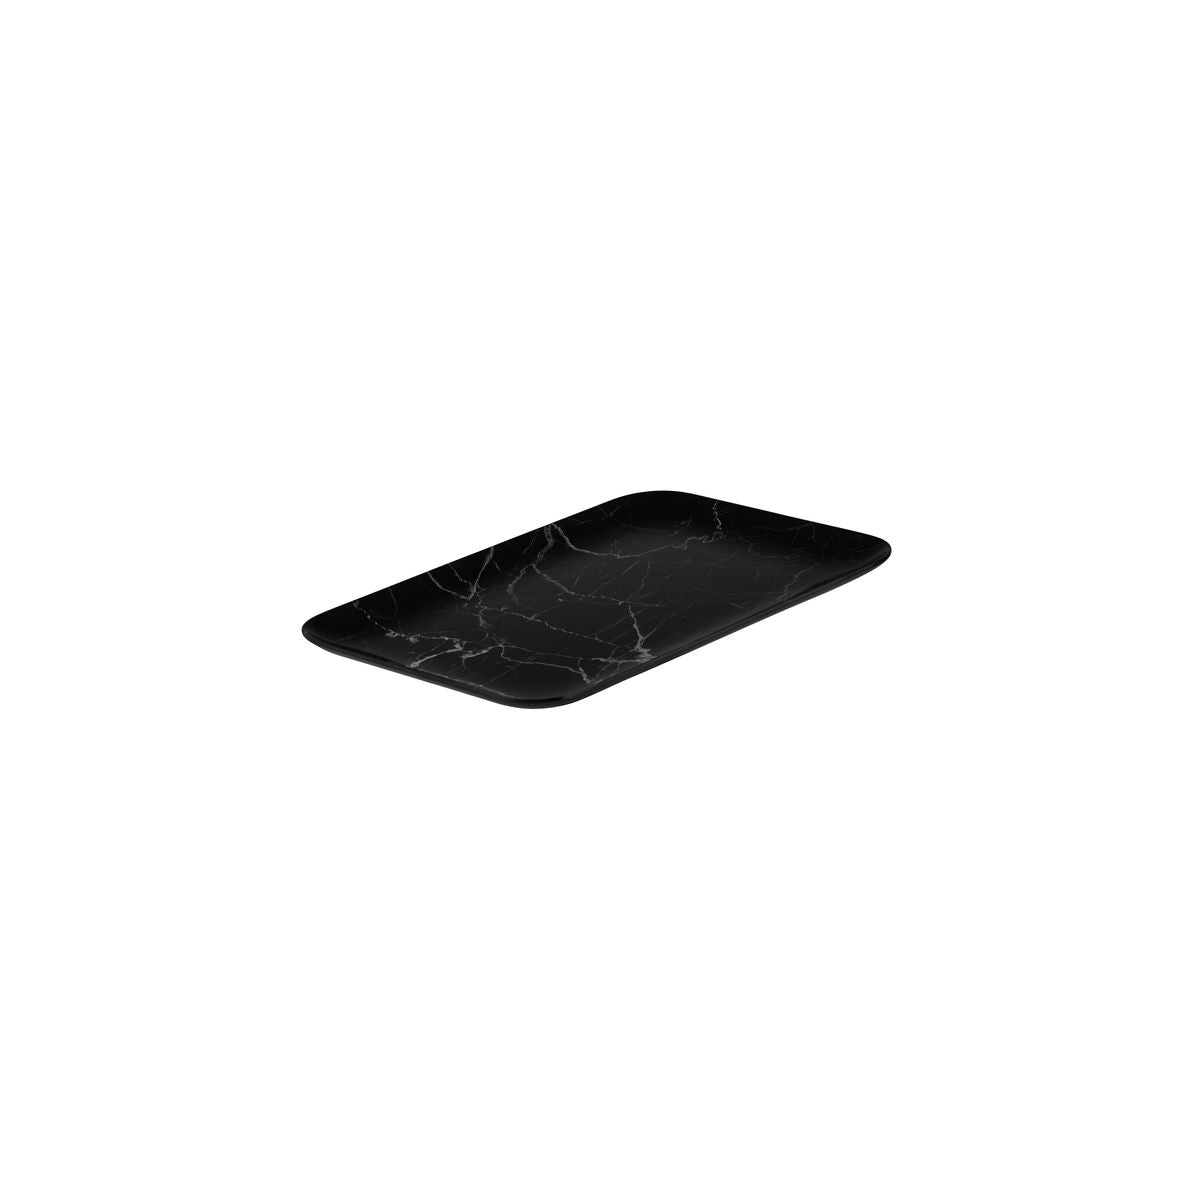 Rectangular Platter, 330 x 230mm, Coupe, Melamine - Black Marble from Ryner Melamine. Sold in boxes of 6. Hospitality quality at wholesale price with The Flying Fork! 